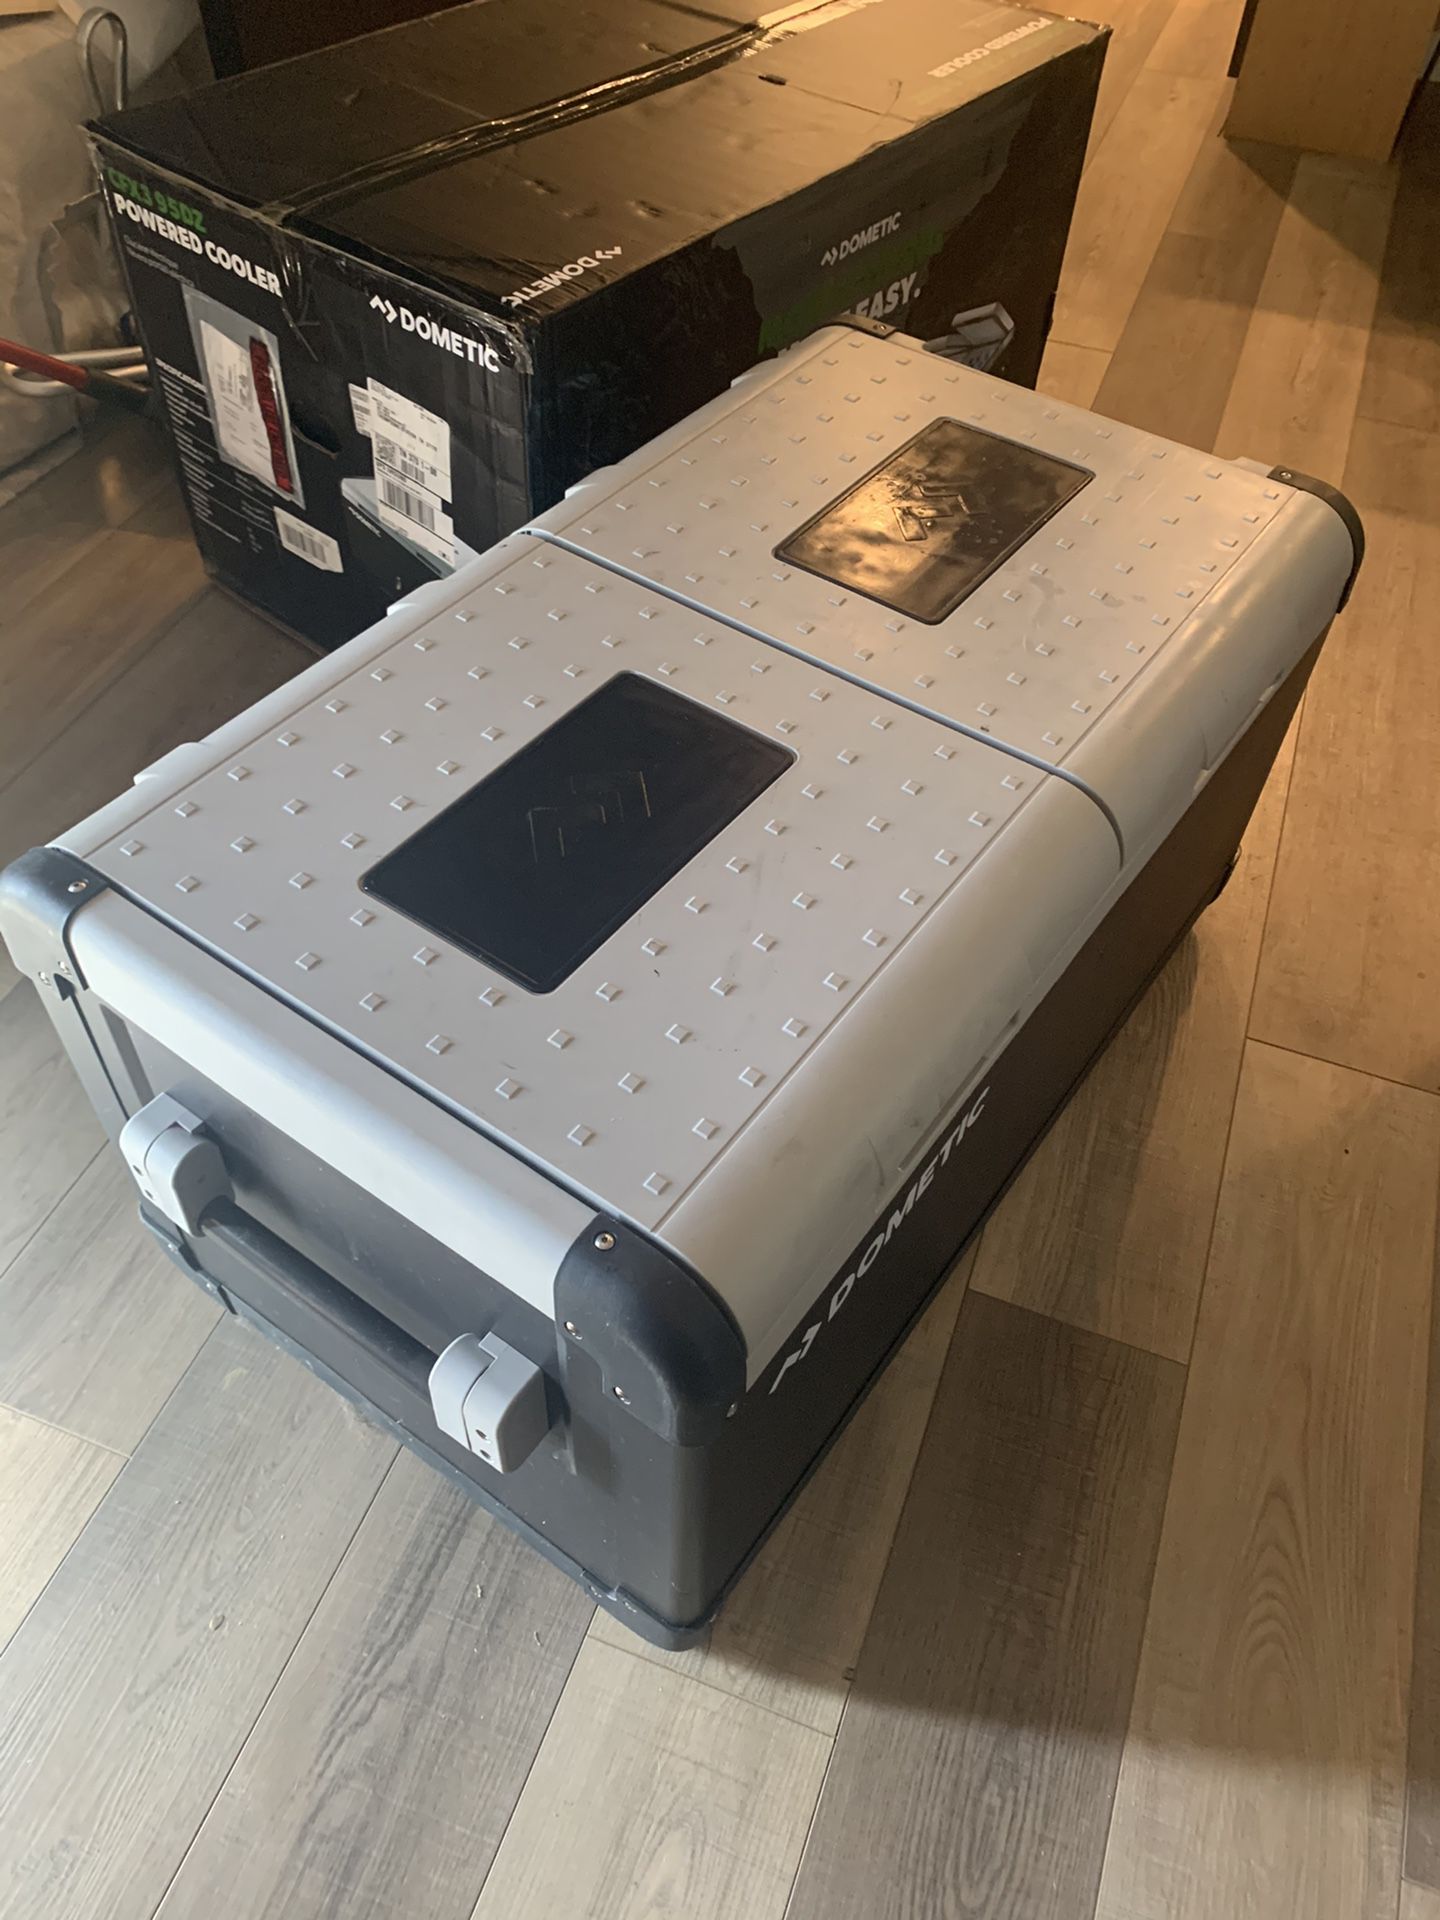 Dometic cooler